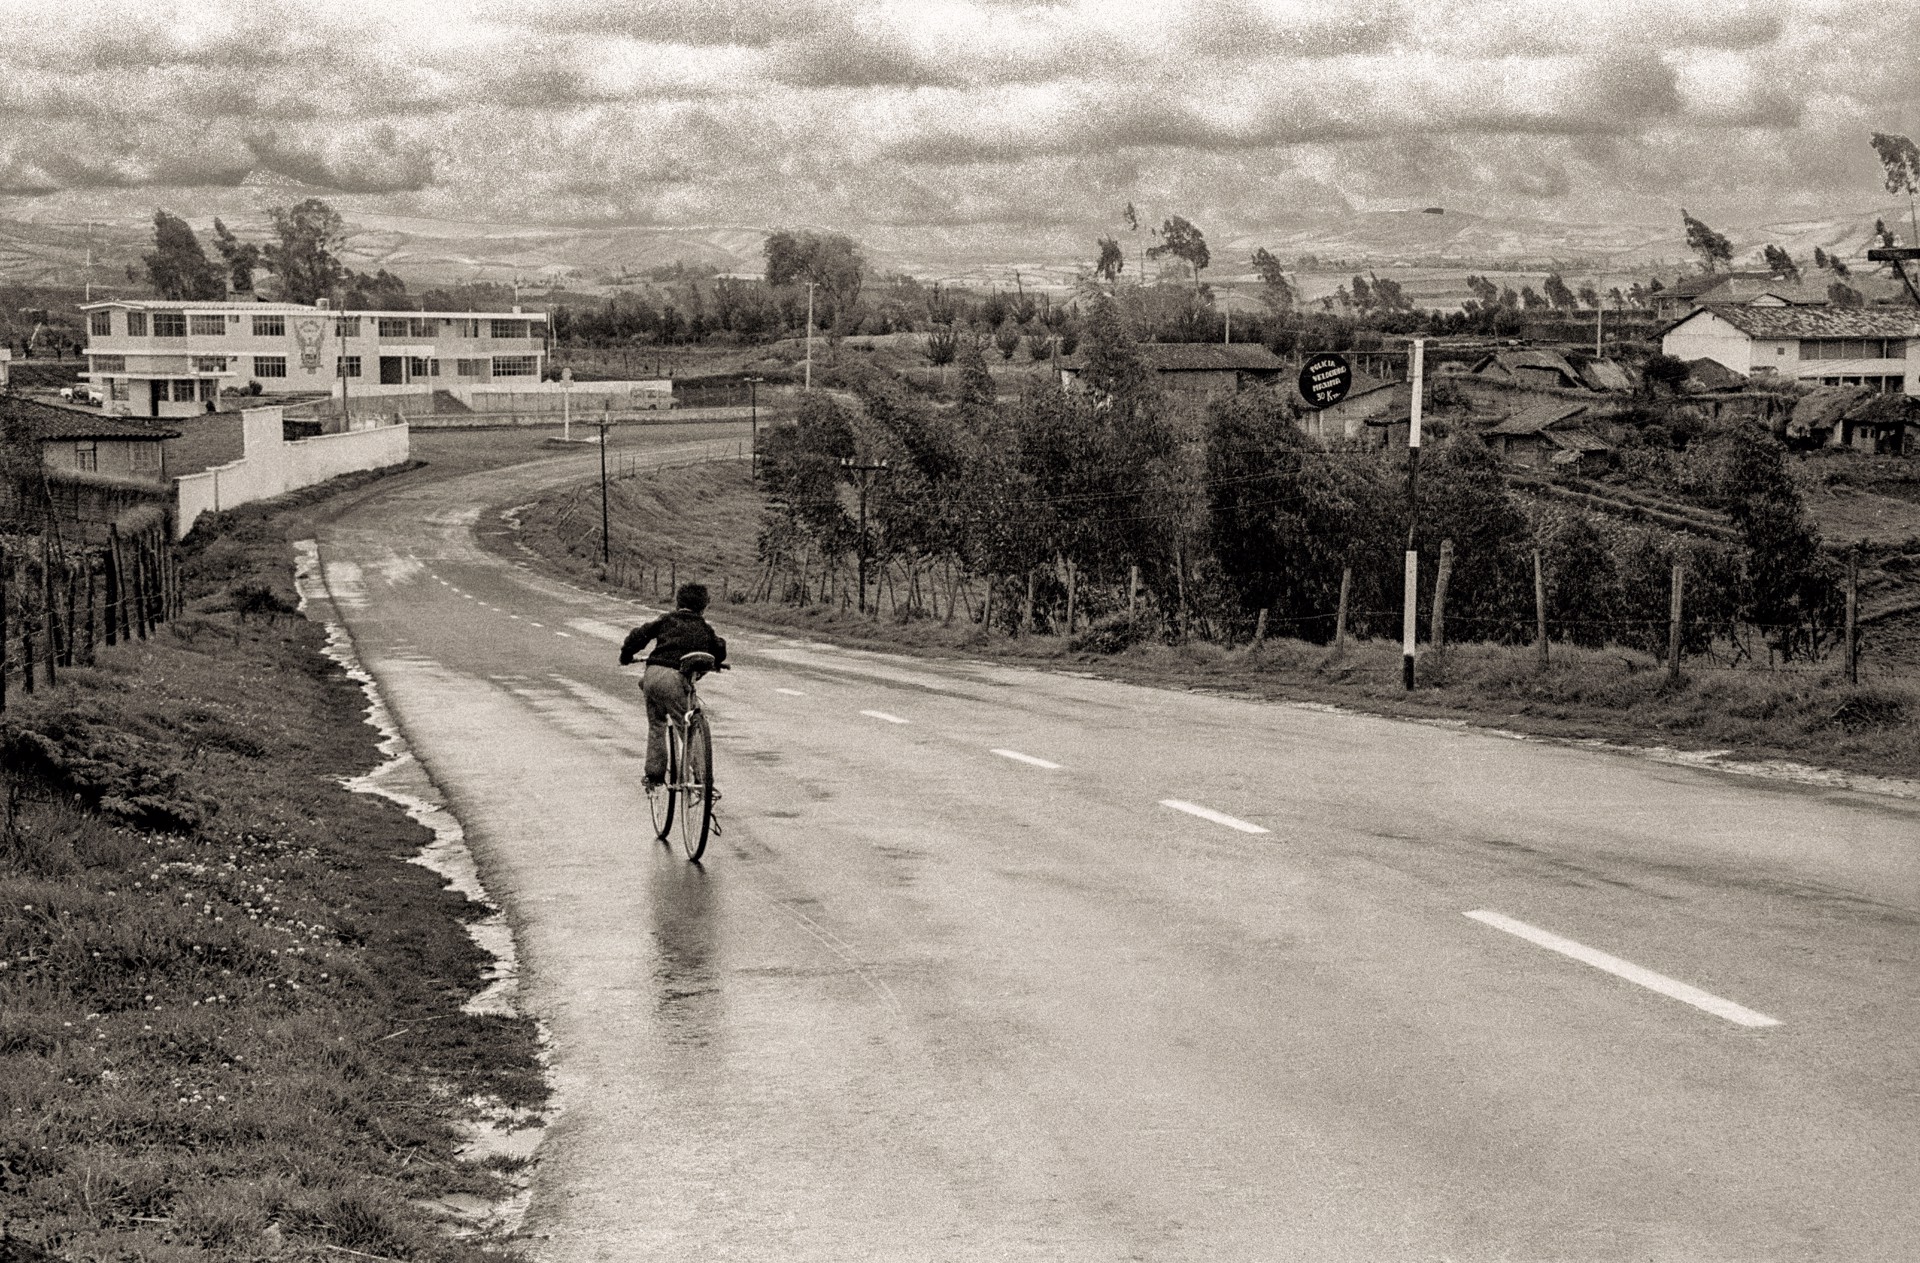 Bicycling Boy on Wet Road, Framed (043) by Jack Dempsey